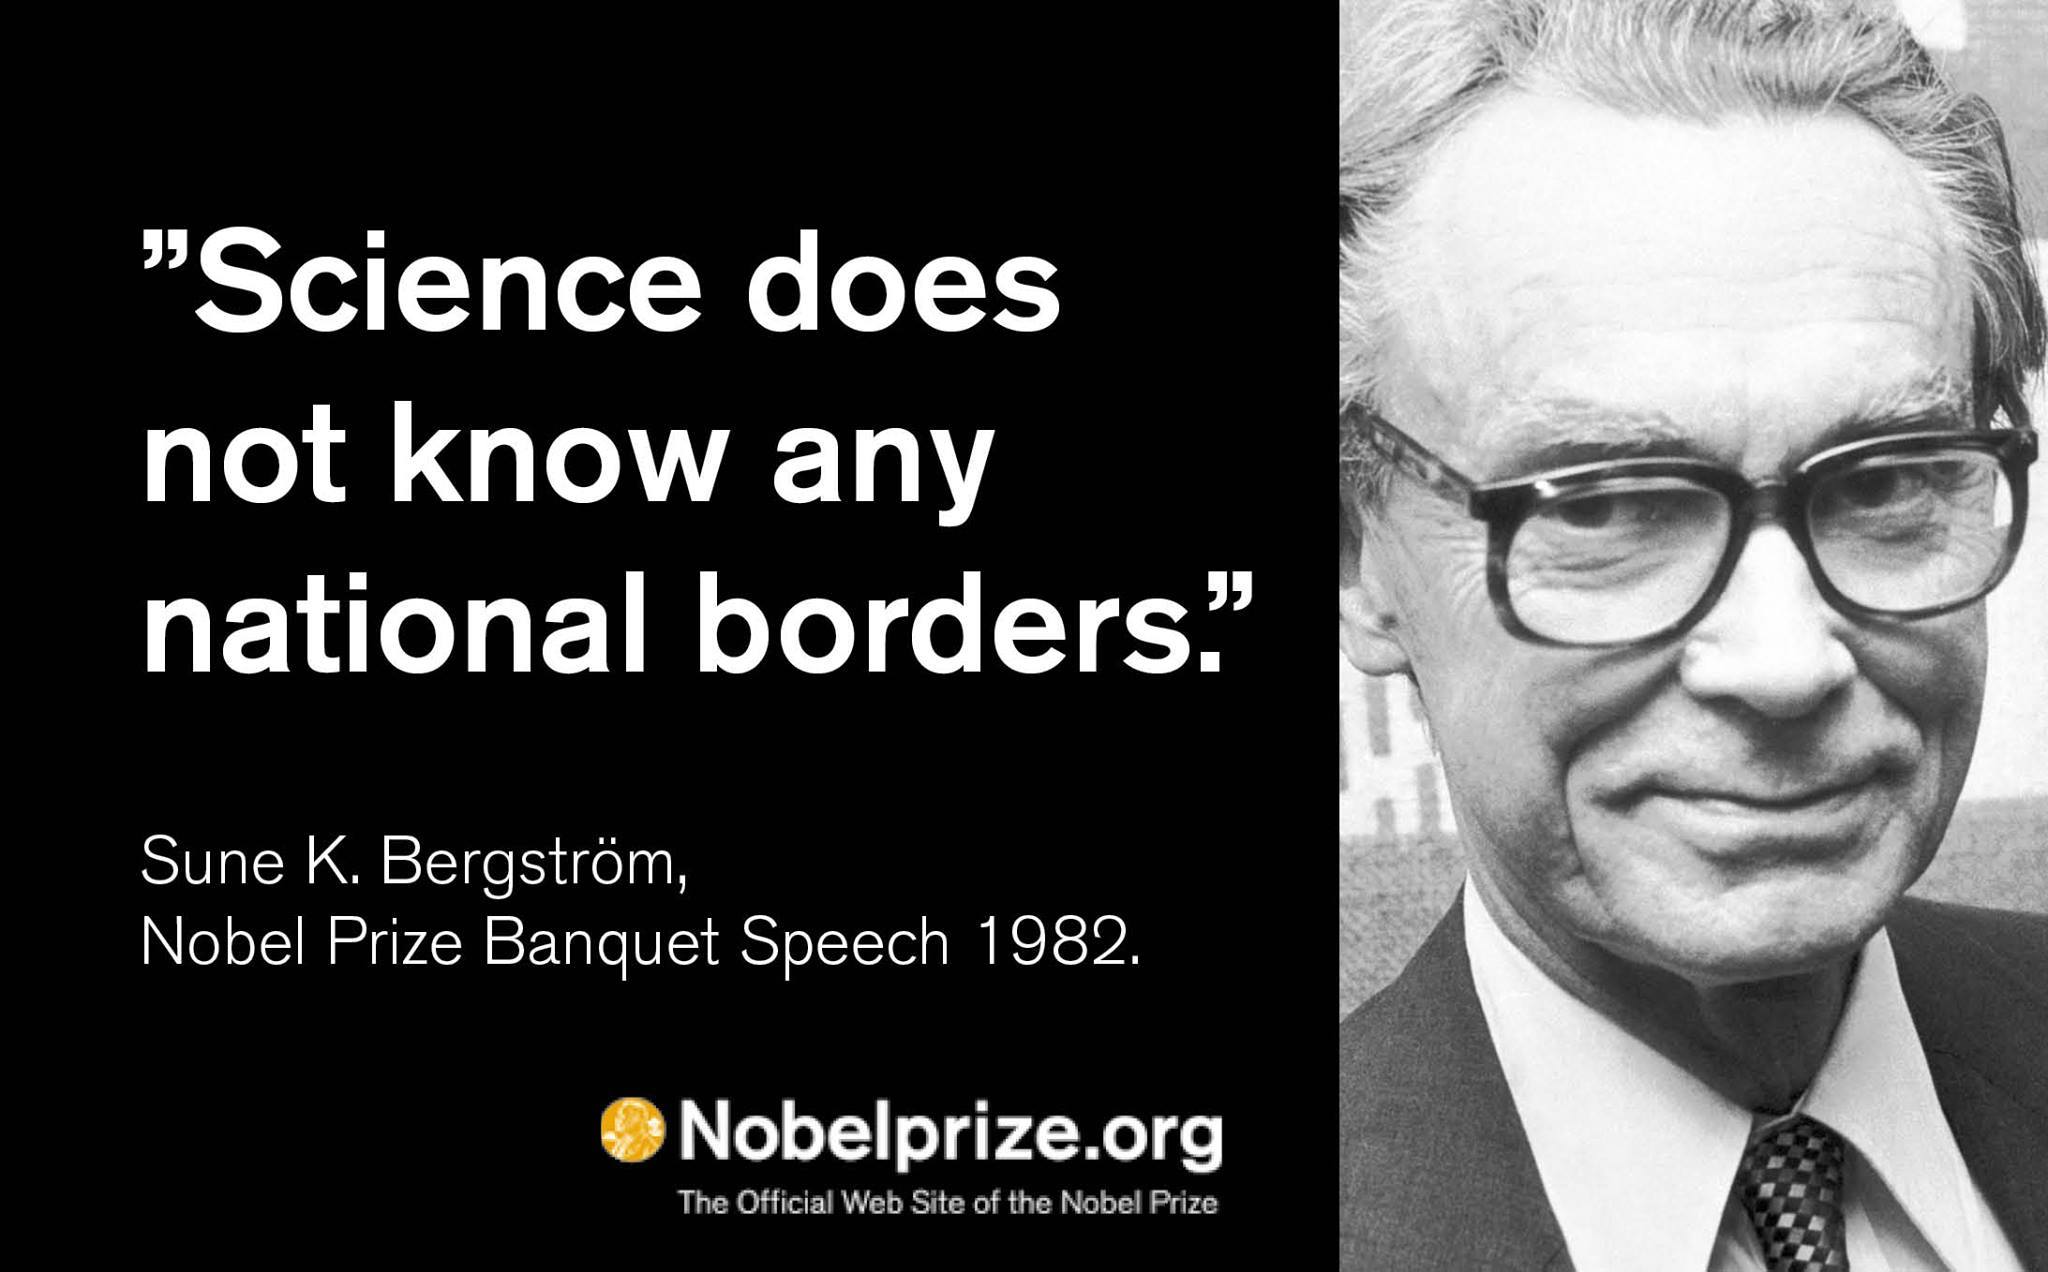 Science does not know any national borders.